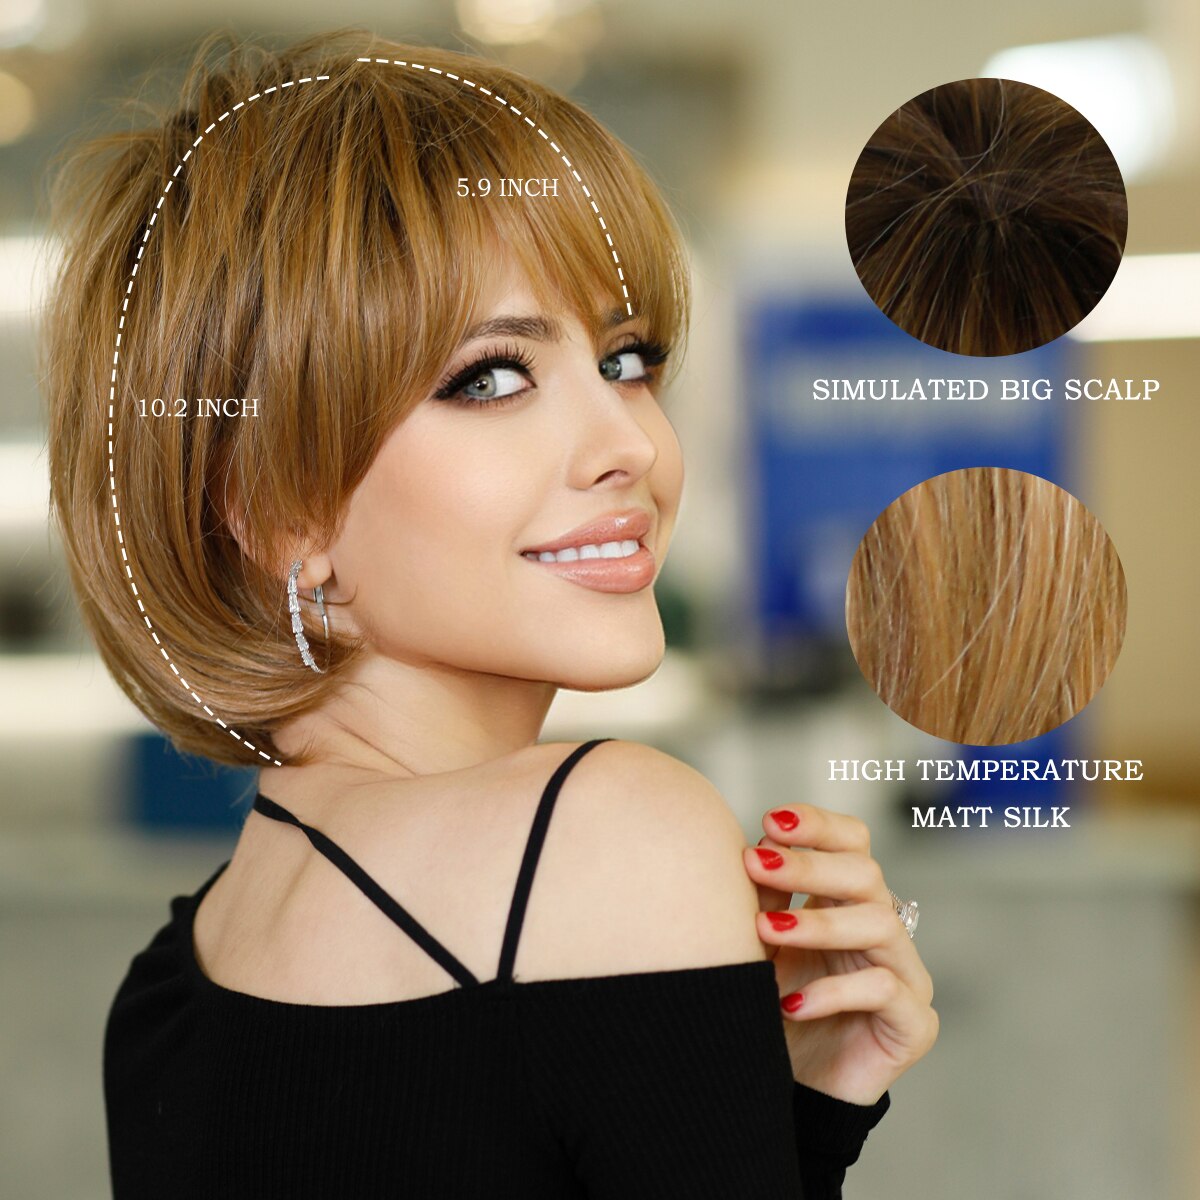 NAMM Ombre Blonde Wig for Women Daily Party Fluffy Bob Wig Natural Synthetic Hair Fashion Wig with Bangs Heat Resistant Fiber